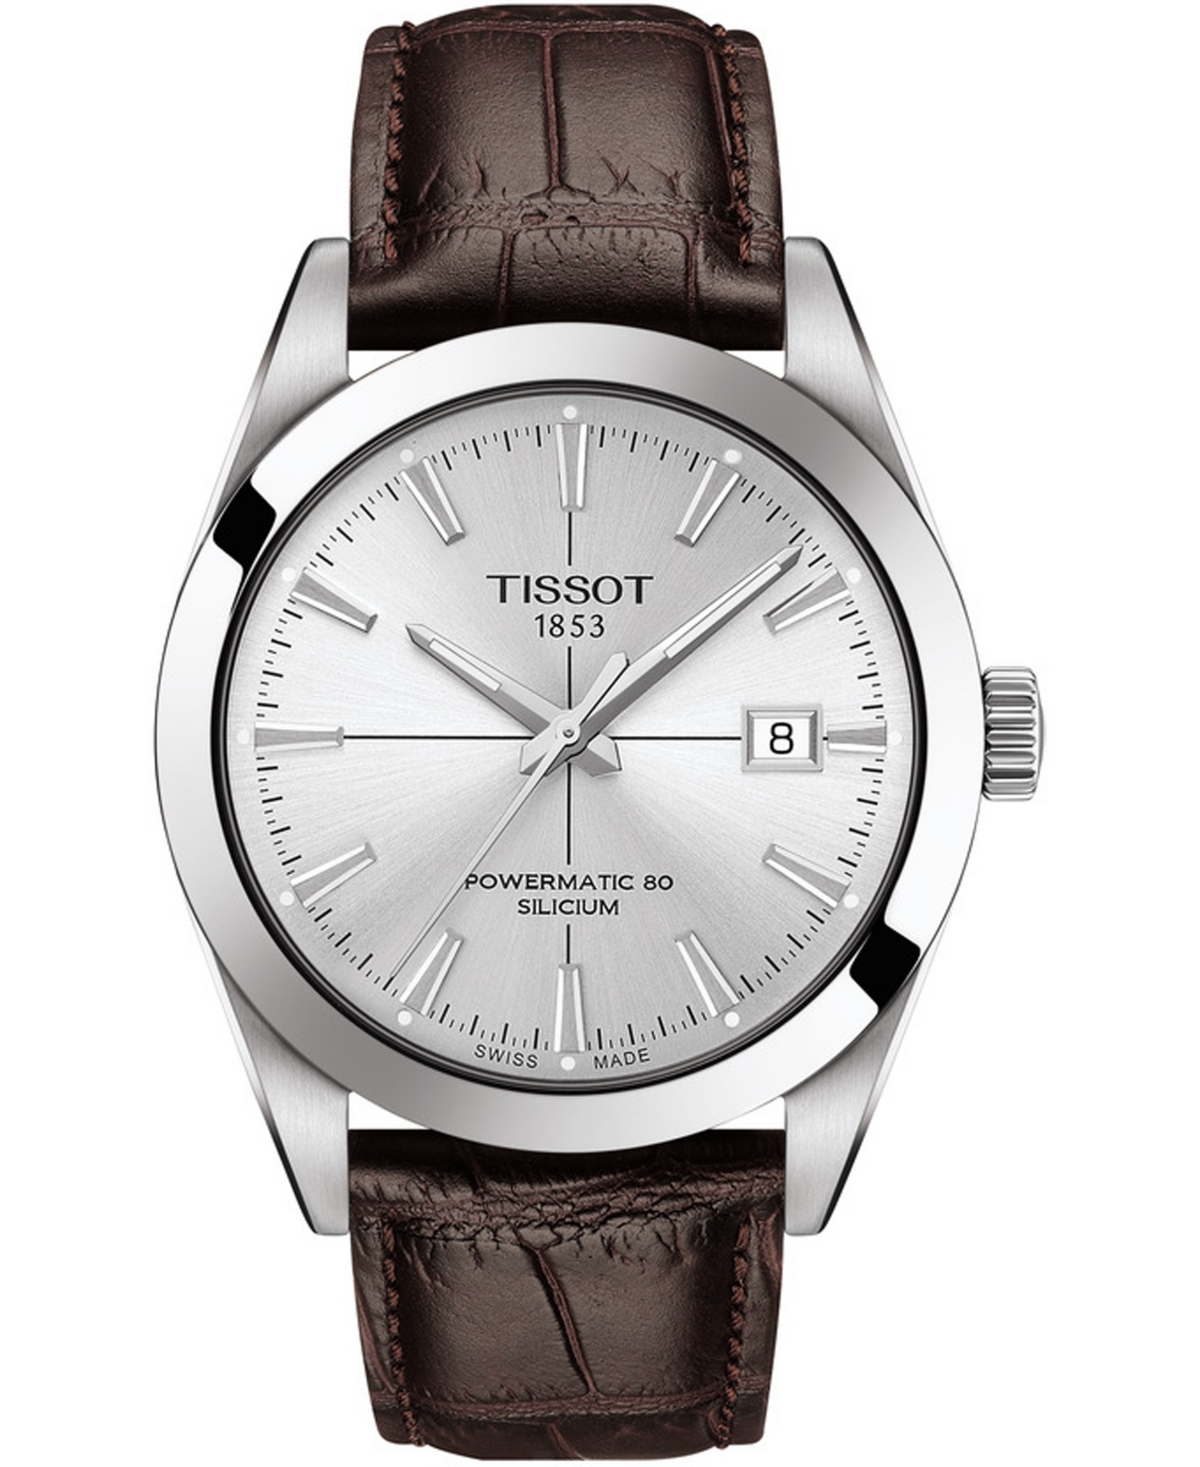 Tissot Men's Swiss Automatic Powermatic 80 Silicium Brown Leather Strap Watch 40mm In Silver